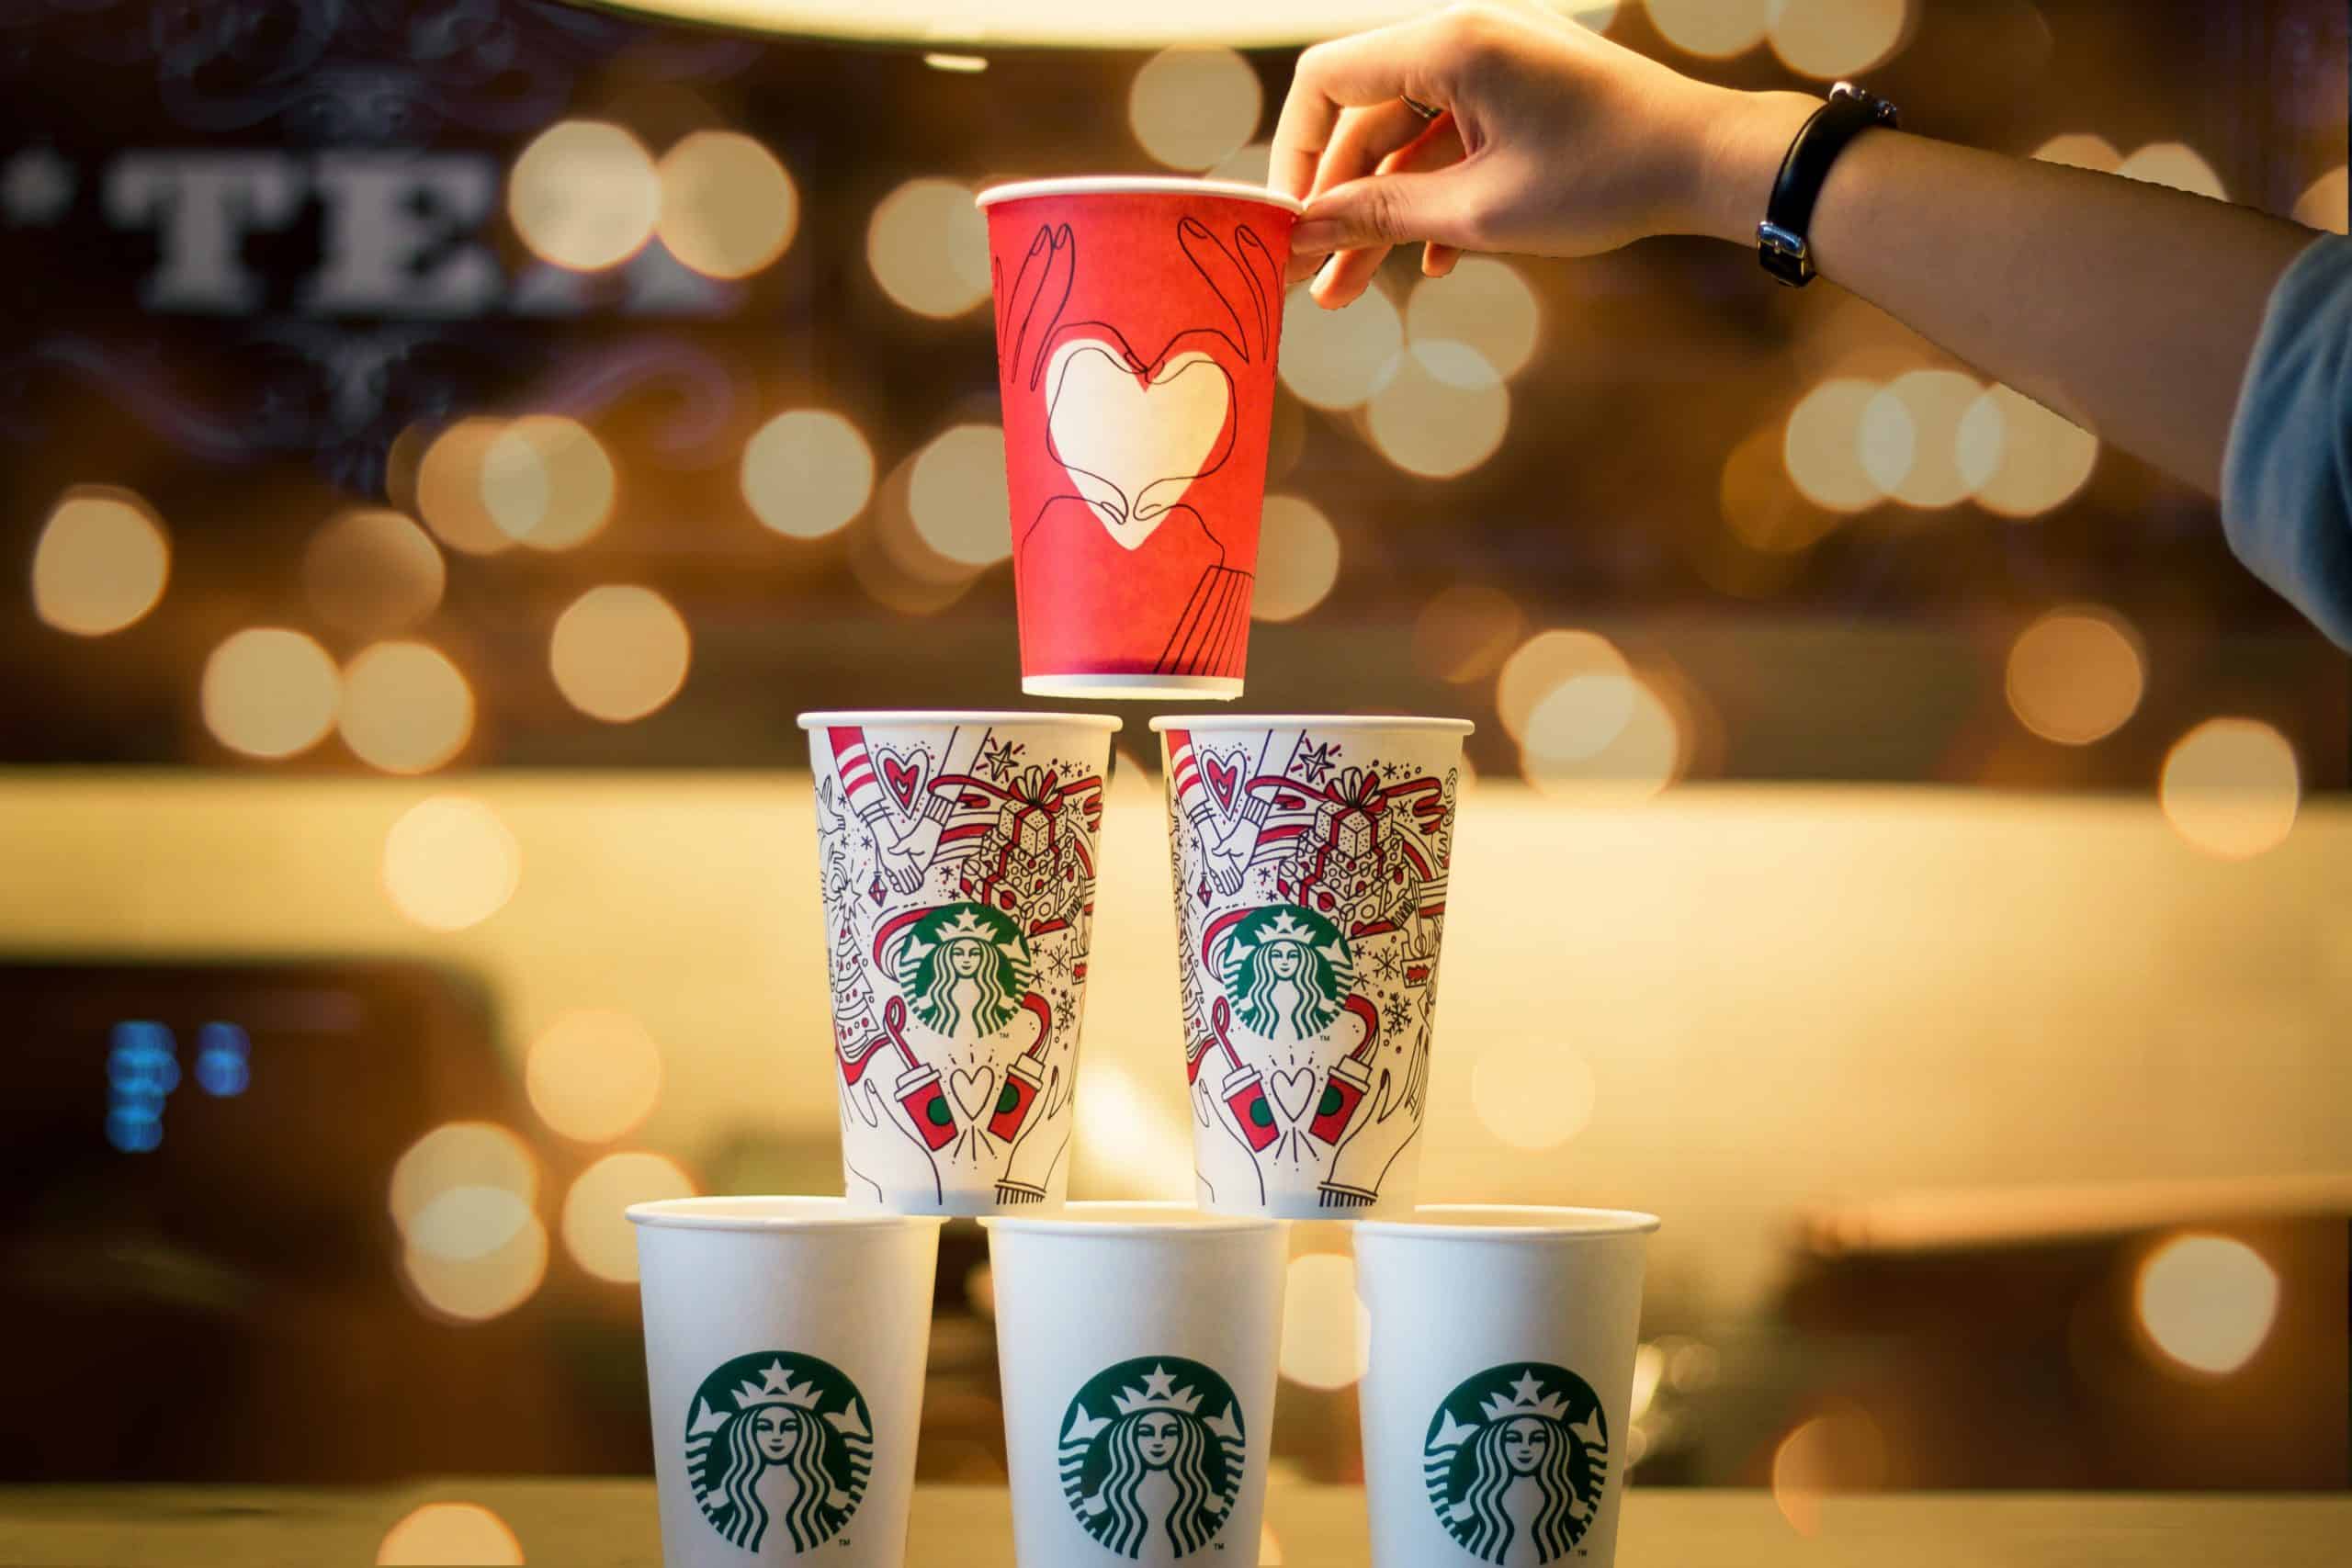 Person stacking Starbucks coffee cups